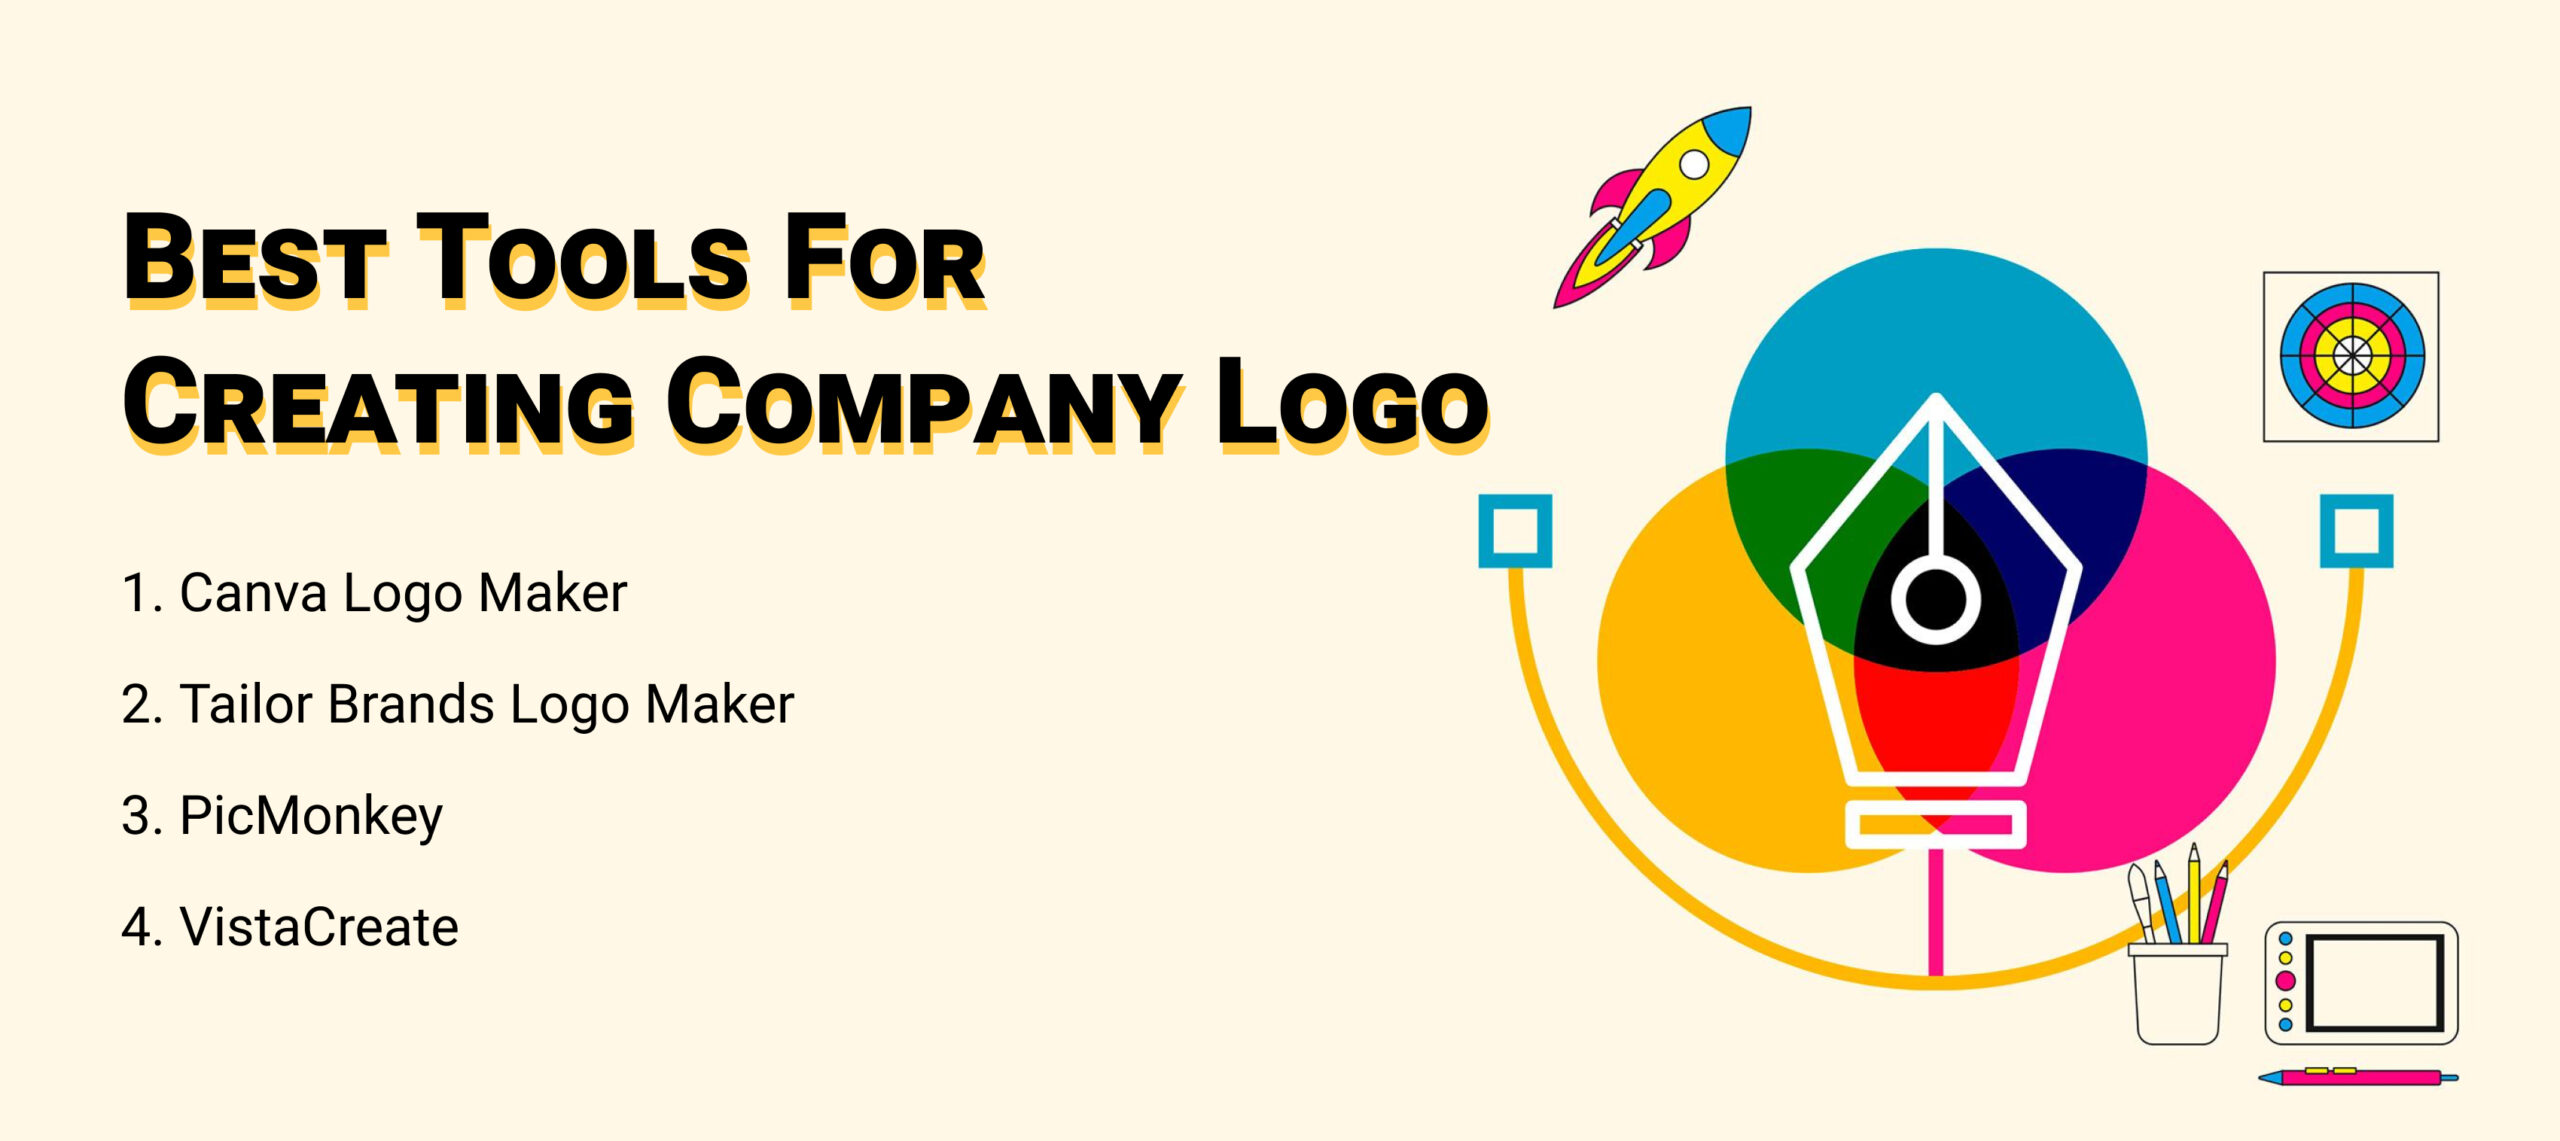  The Best Design Tools for Creating your Company Logo